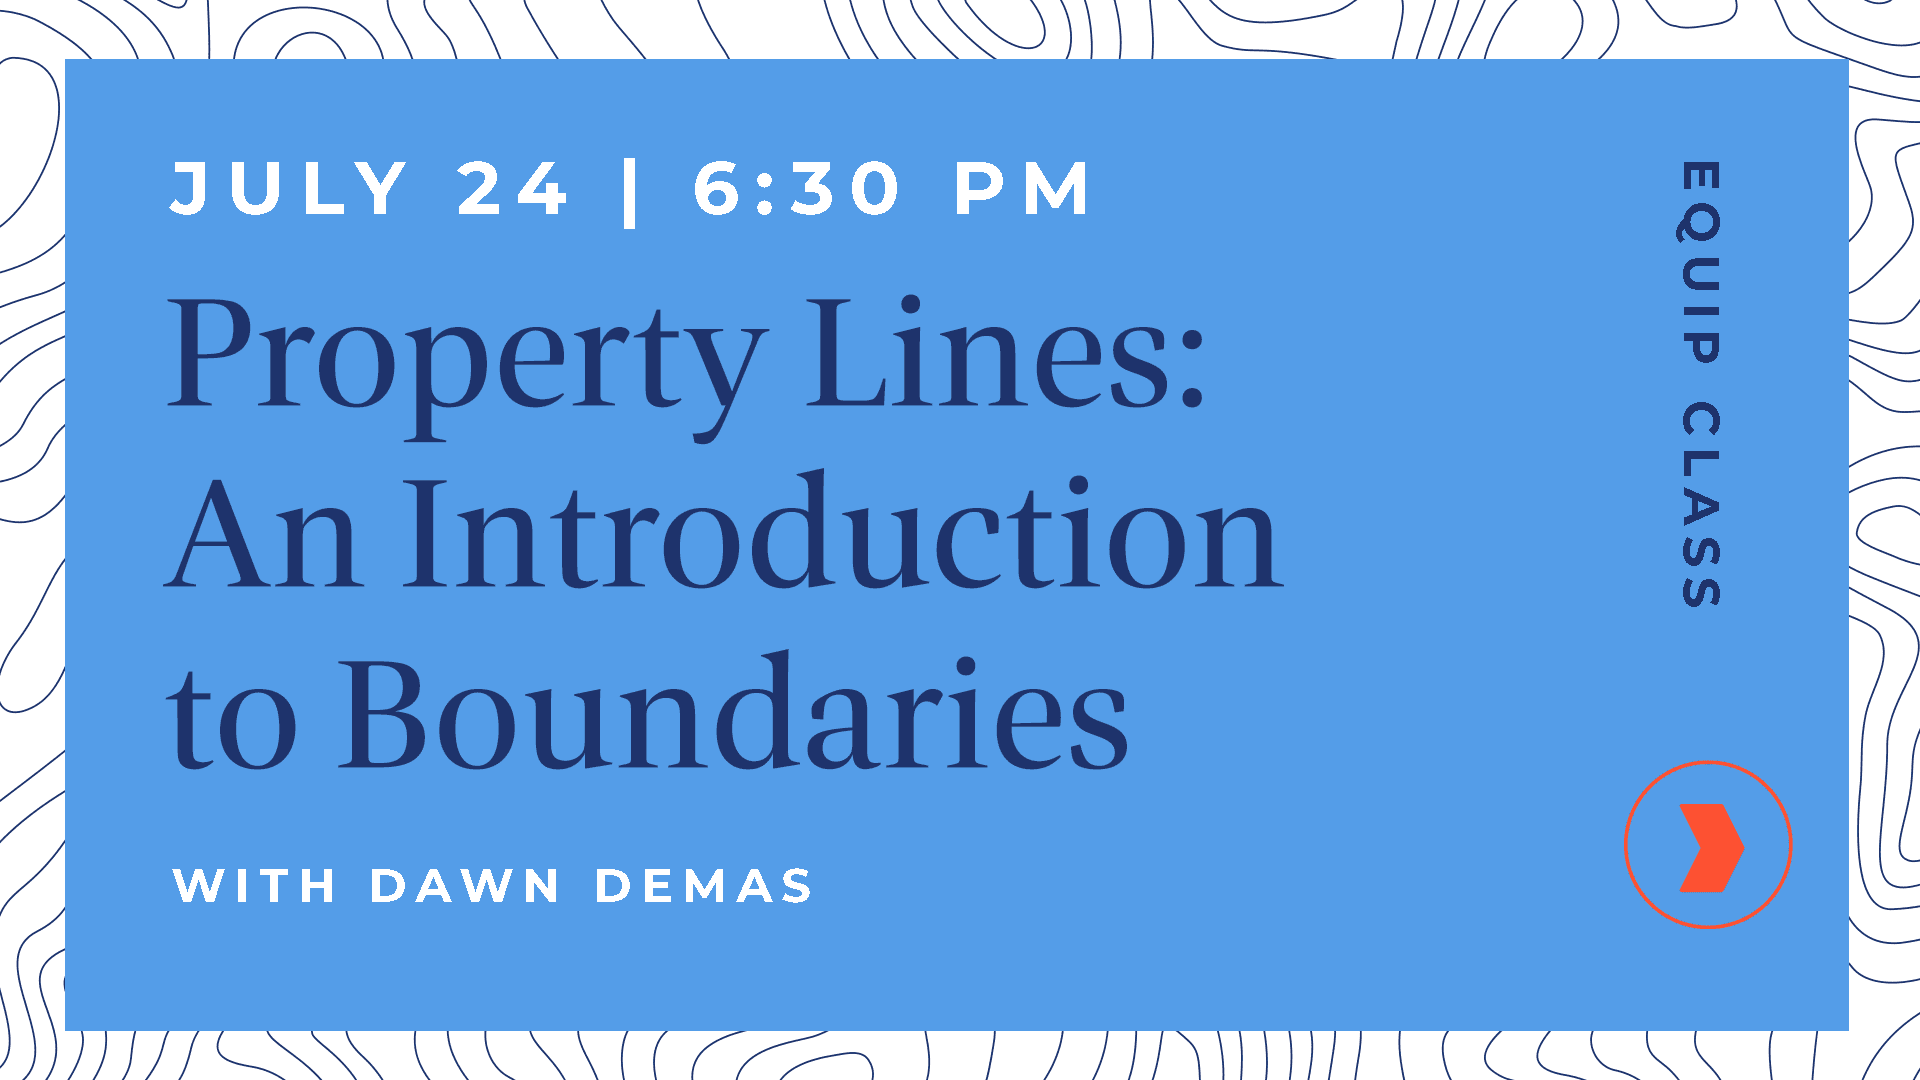 Equip Class Property Lines An Introduction to Boundaries - Property Lines: An Introduction to Boundaries